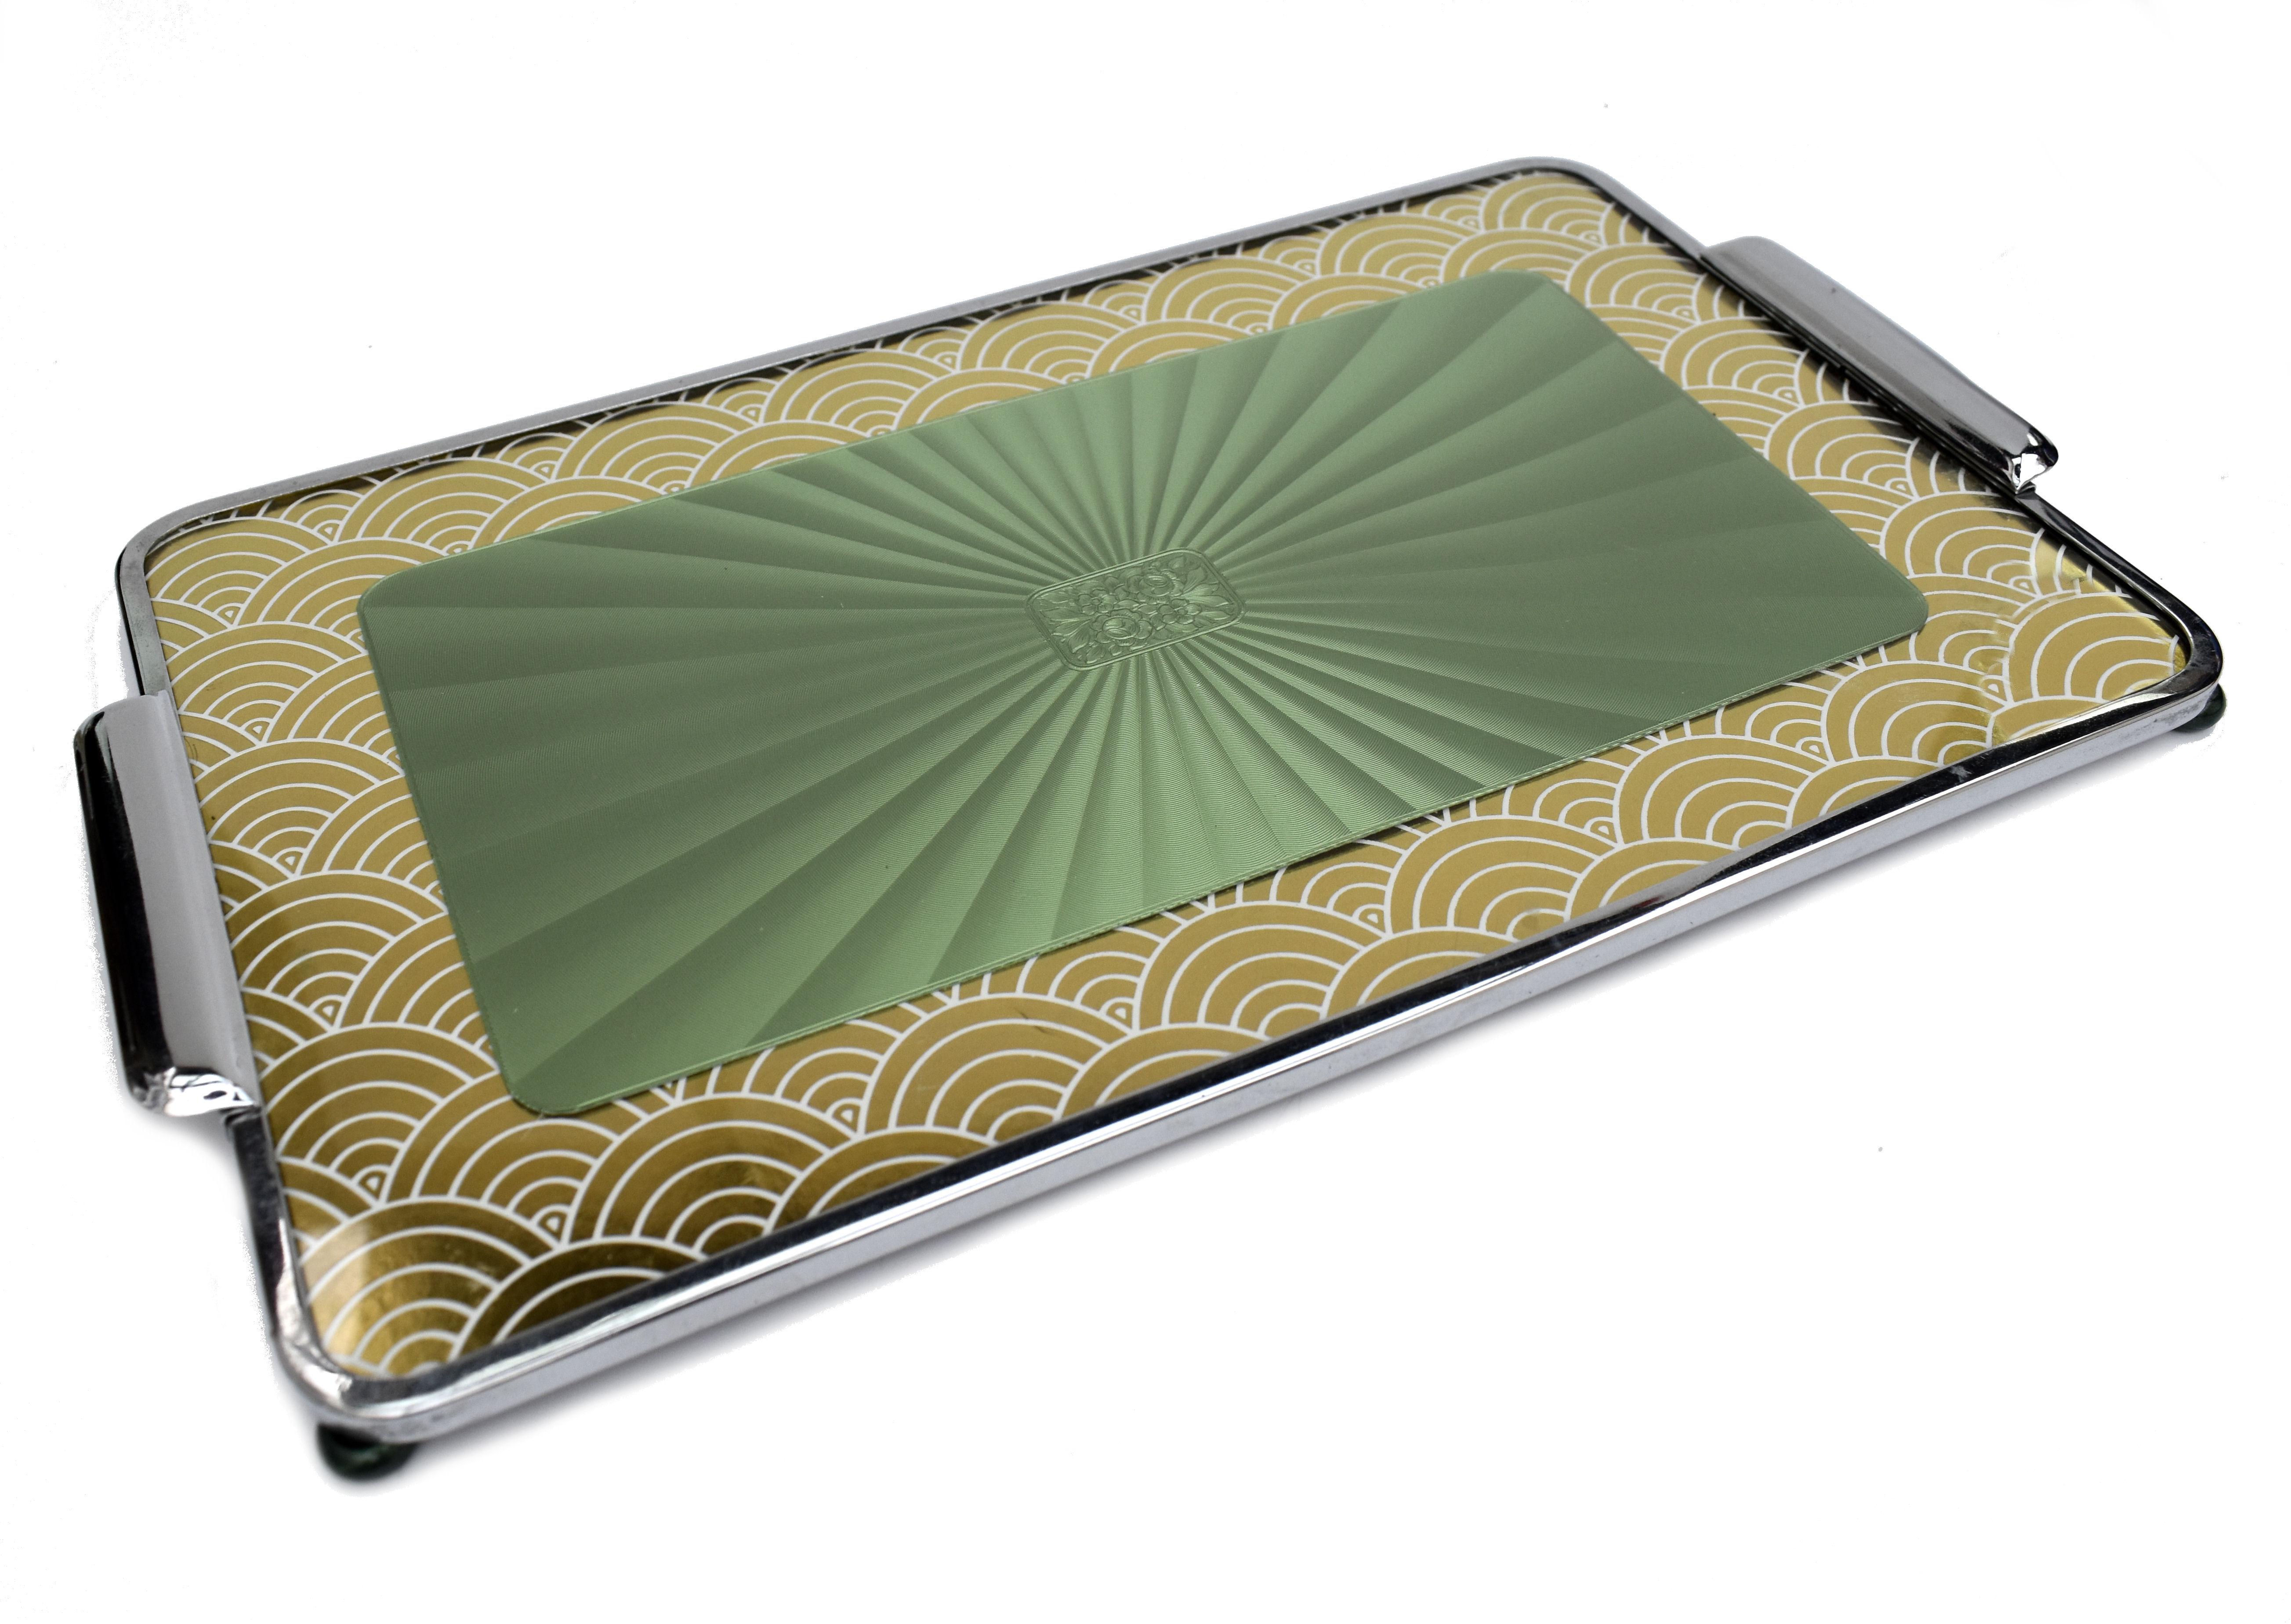 A cute size and original 1930's English Art Deco tray featuring a wonderful cloud border in gold and white with a radial green central pattern behind glass. Condition is very good, no damage, very minor signs of age. Very distinctive Deco motif with